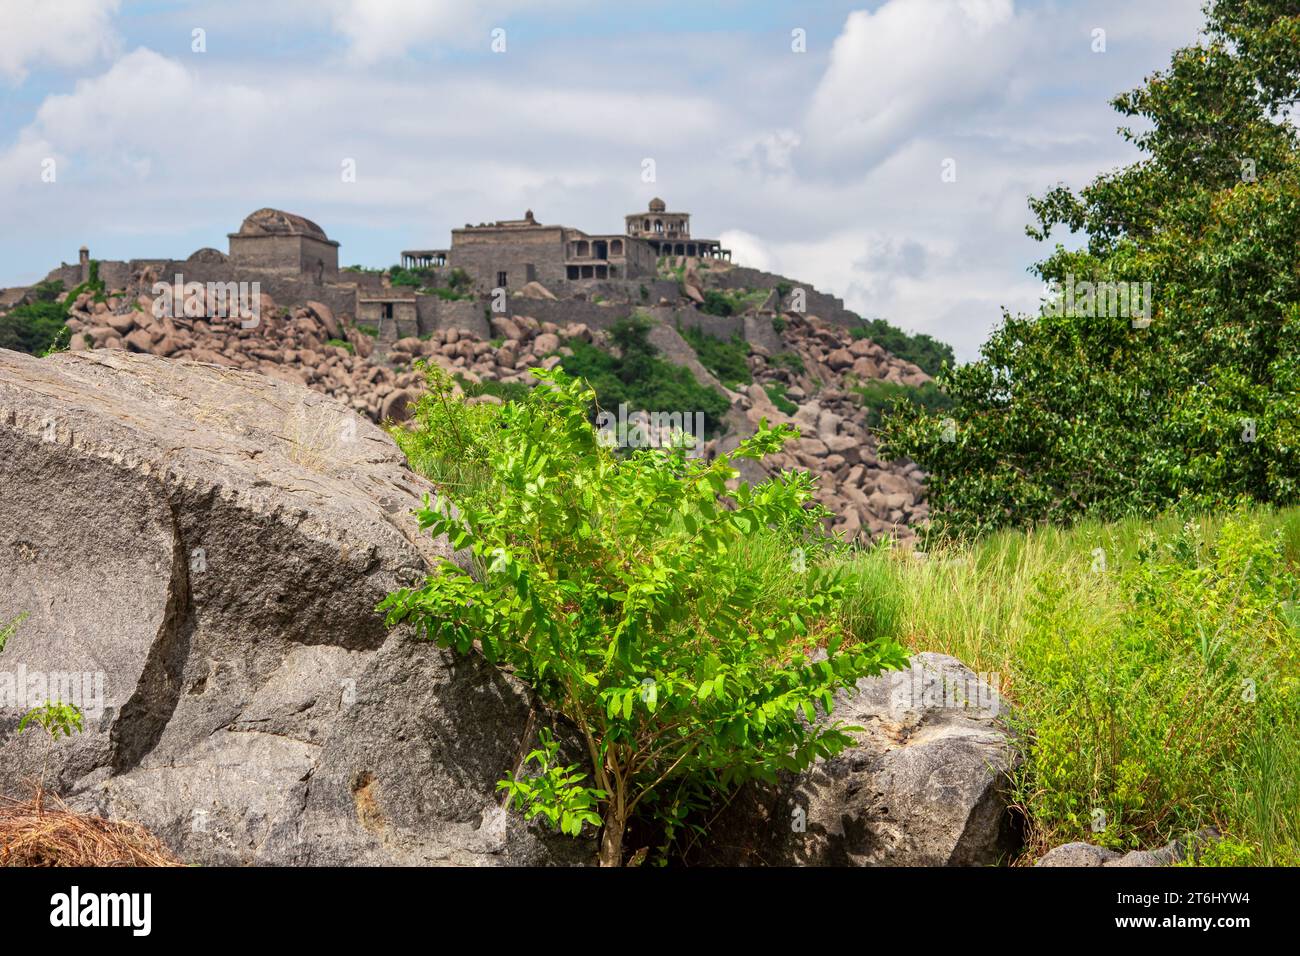 View of the Queen's fort in the Gingee Fort complex in Villupuram district, Tamil Nadu, India. Focus set on foreground leaves. Stock Photo